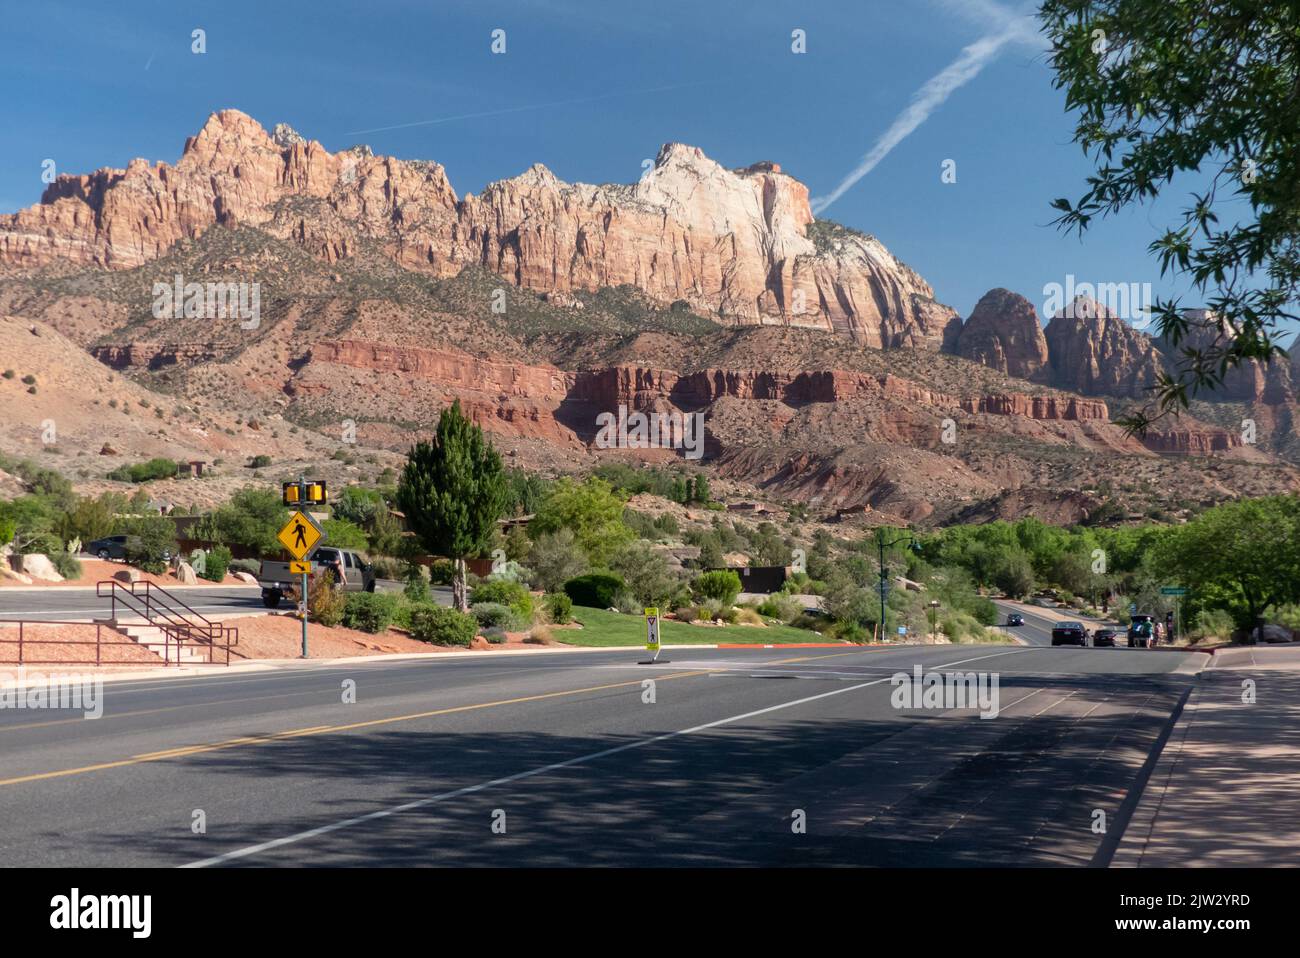 Zion NP in Utah, USA: approaching the entrance. Stock Photo